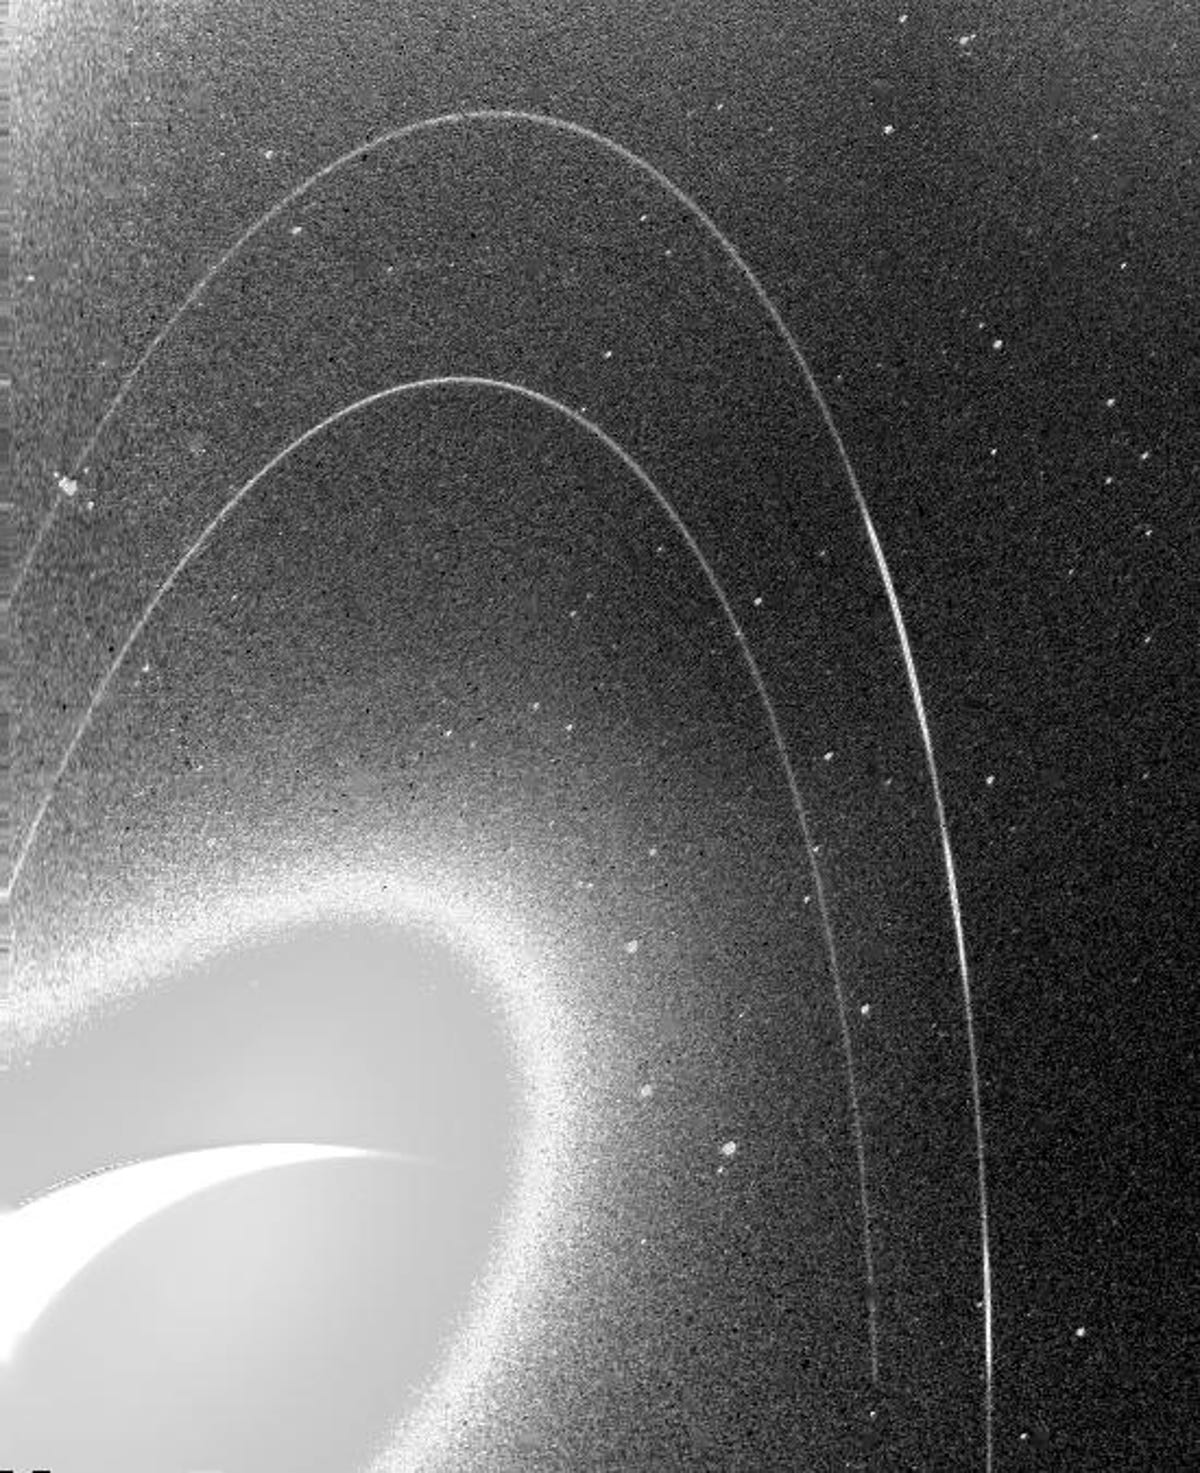 A grainy black-and-white image shows Neptune's fragile rings.